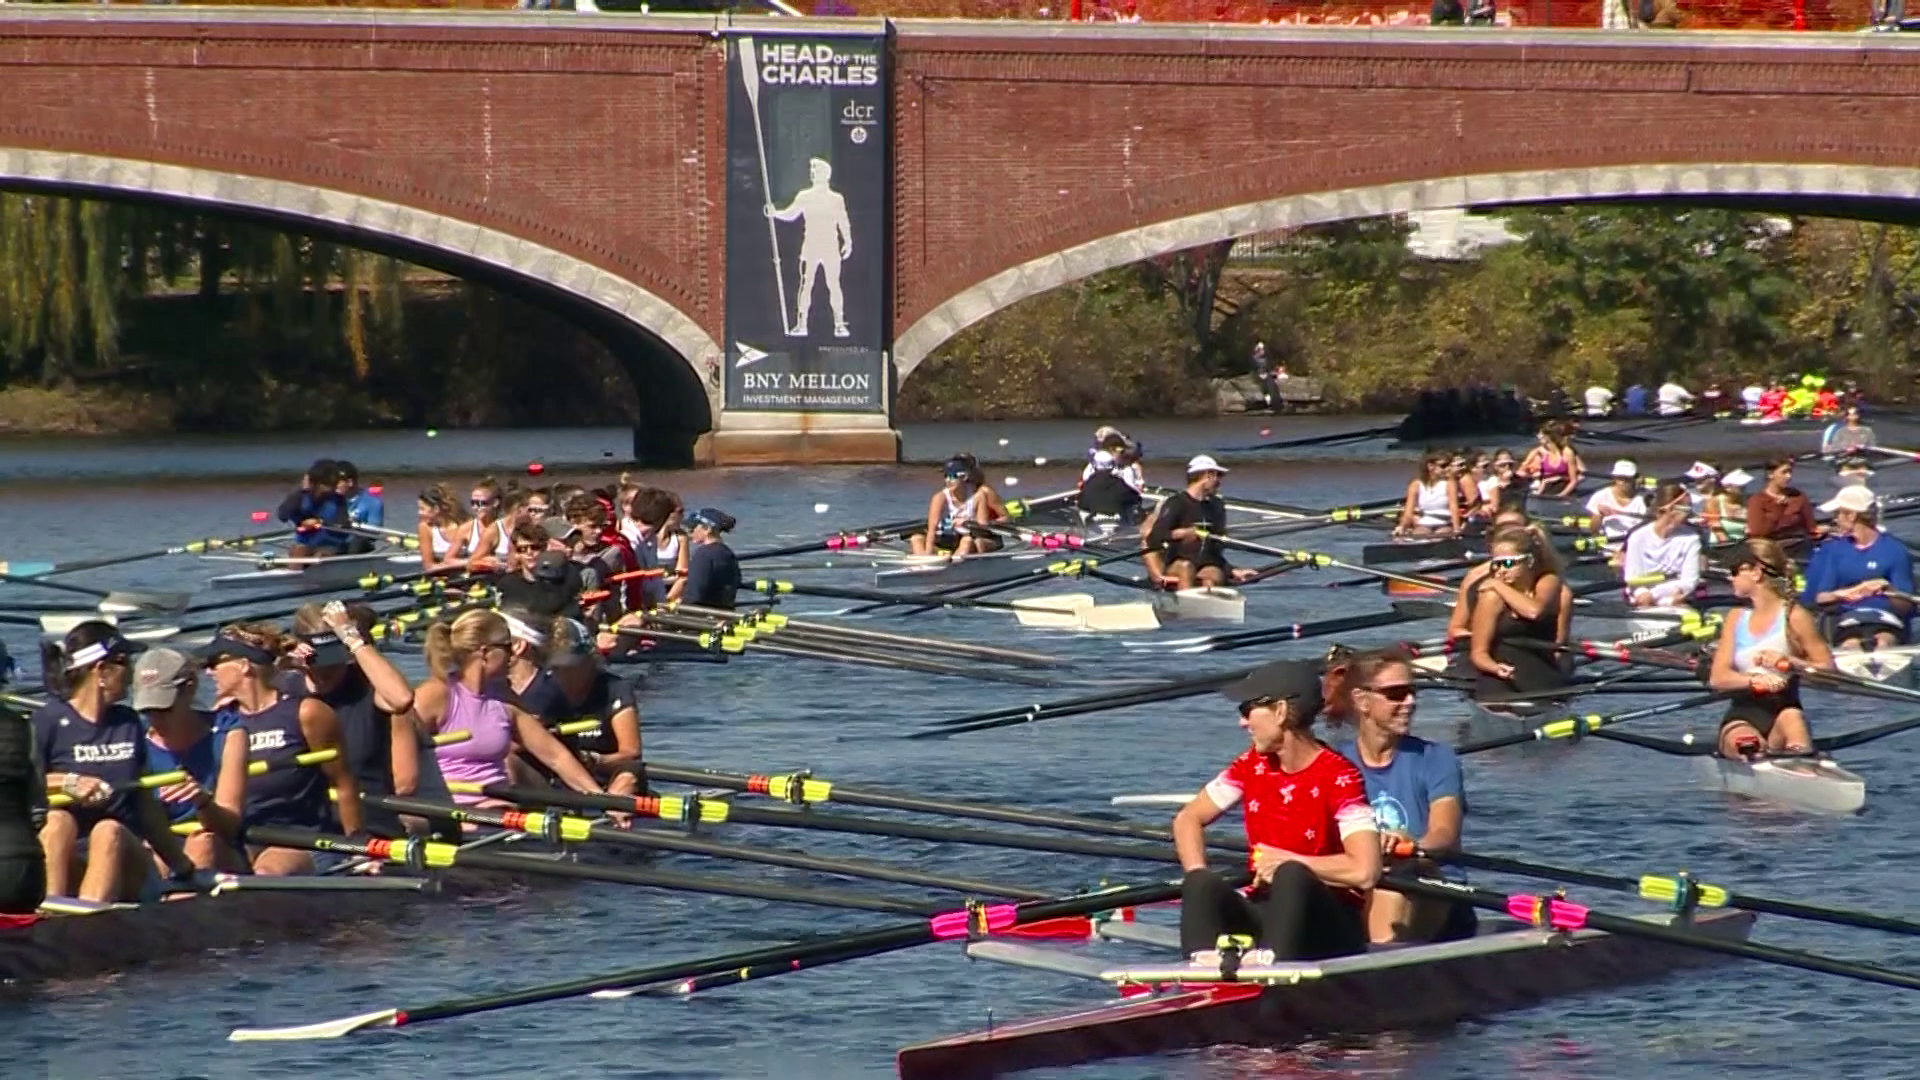 Traffic tips for the 2022 Head of the Charles Regatta